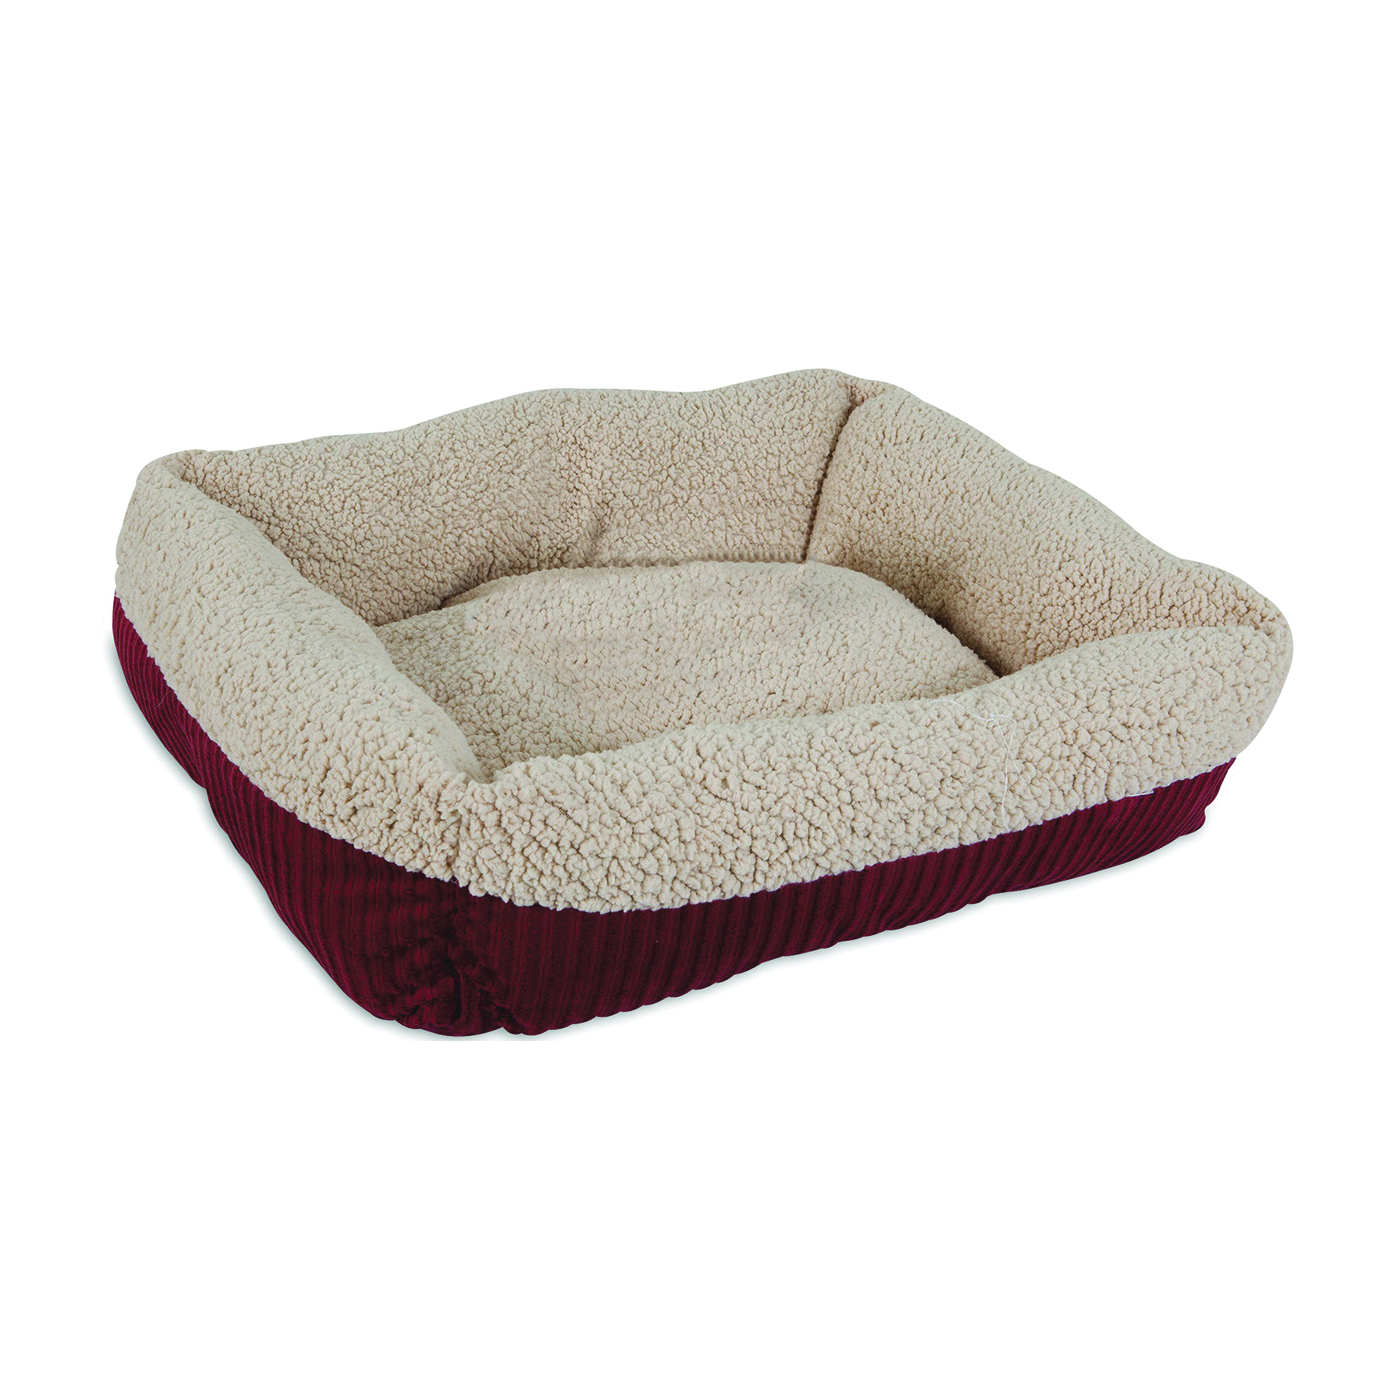 80135 Pet Lounger, 19-1/2 in L, 19-1/2 in W, Oval, Lambs Wool/Corduroy Cover, Cream/Red